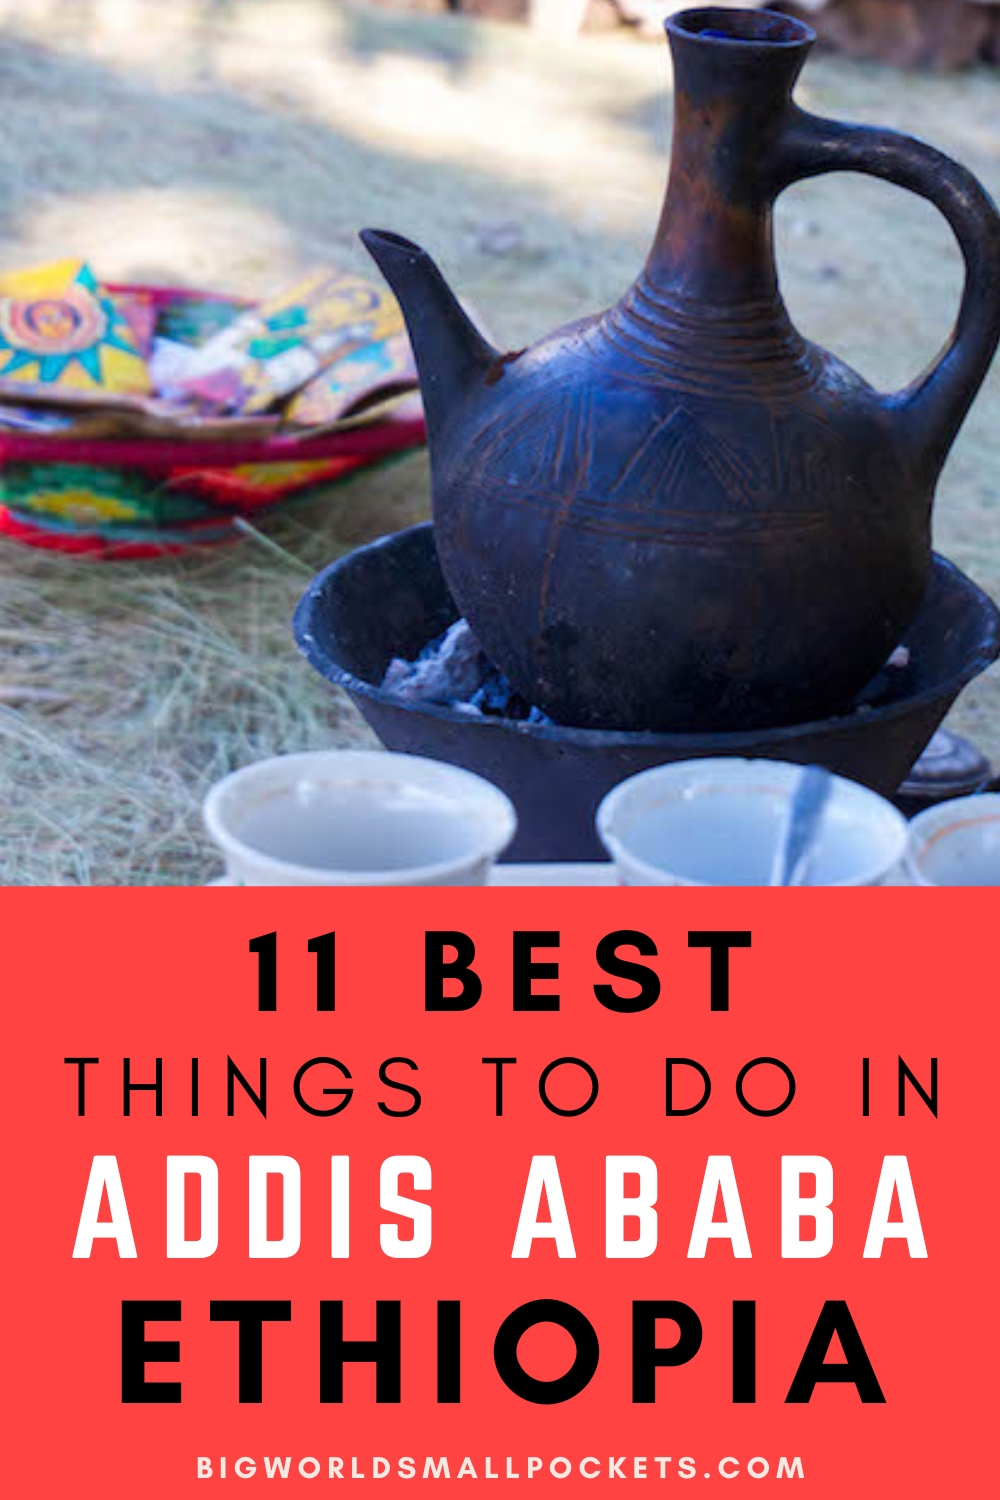 Top 11 Things to Do in Addis Ababa